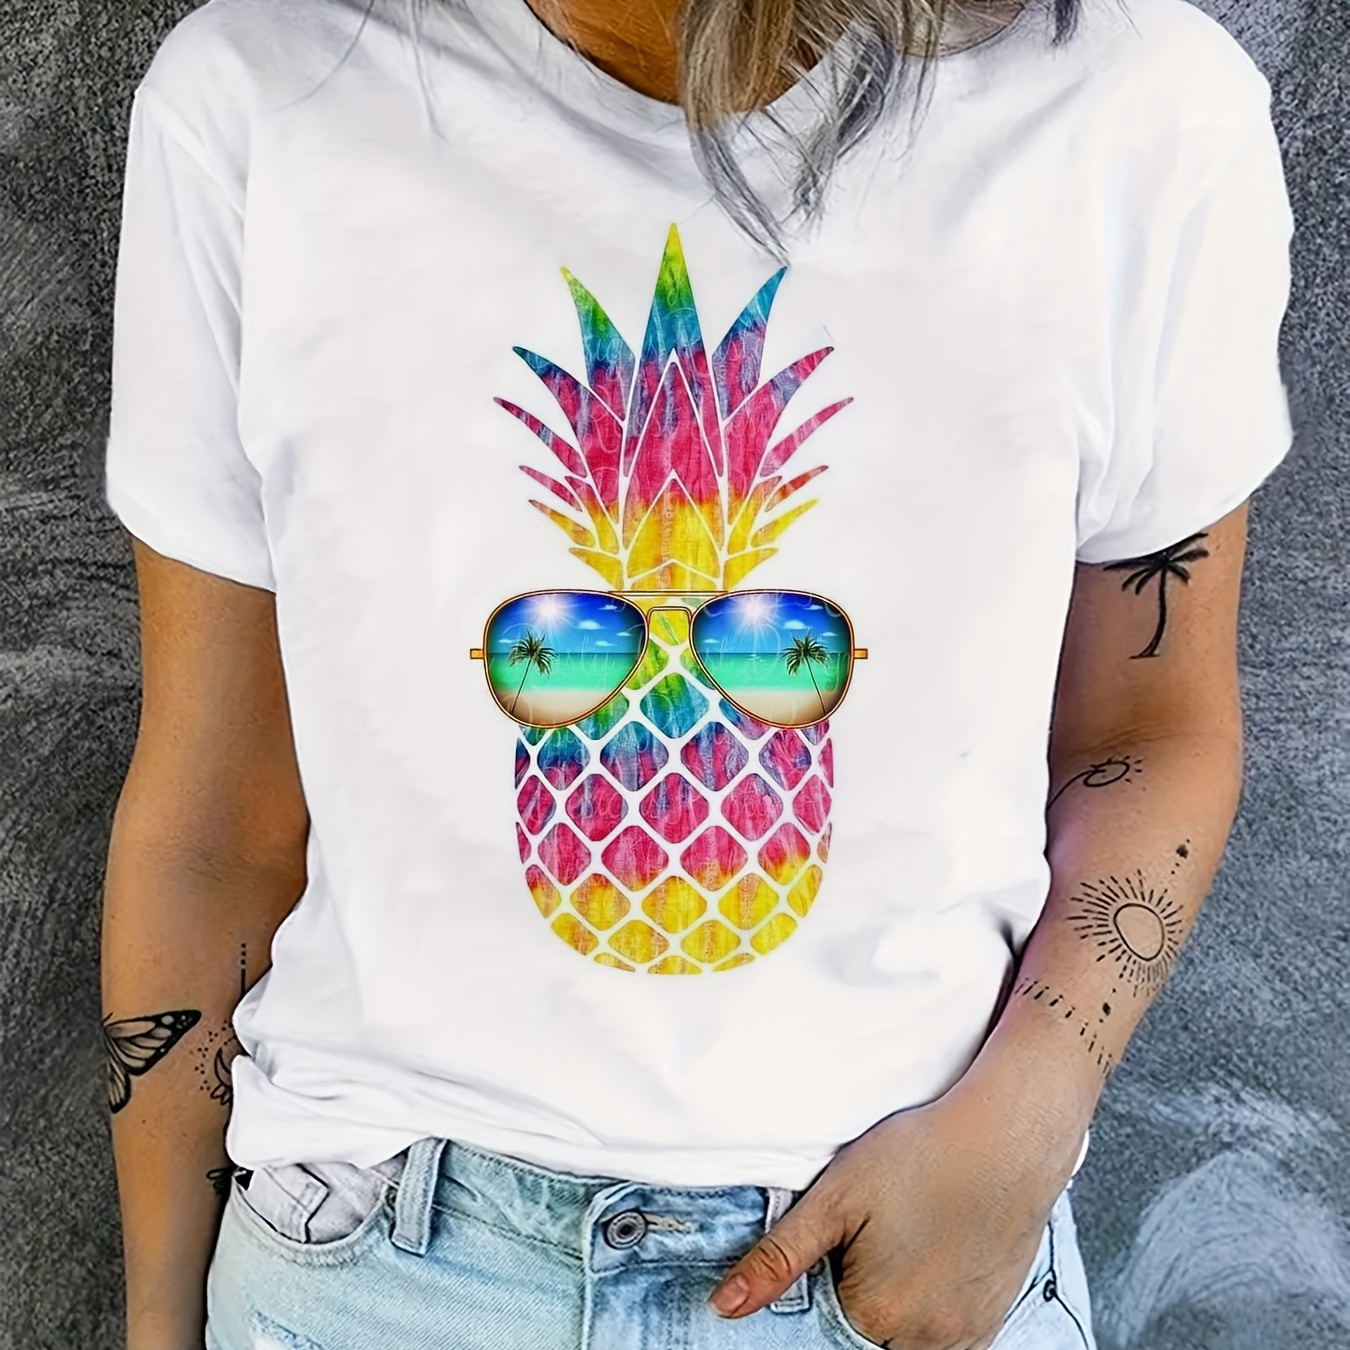 

Pineapple Print Crew Neck T-shirt, Casual Short Sleeve Top For Spring & Summer, Women's Clothing